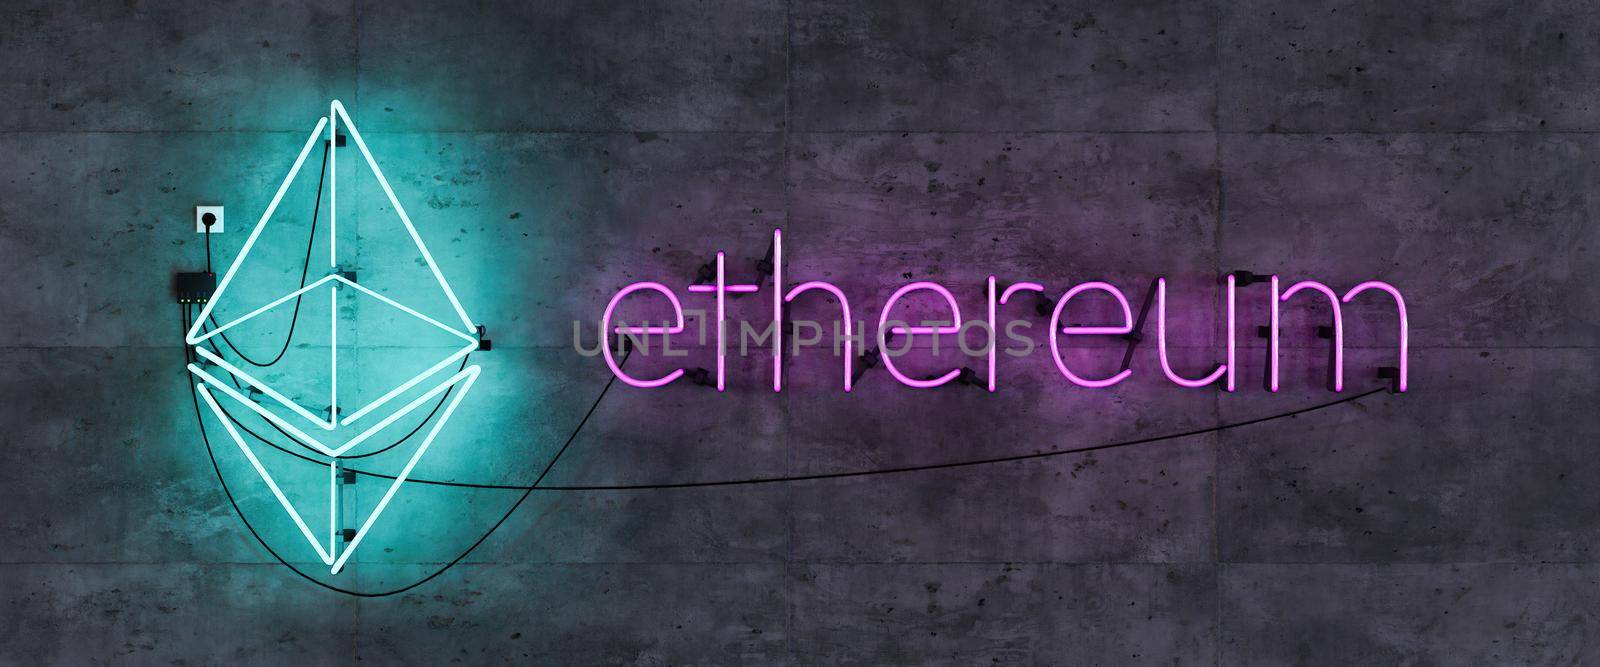 neon lamp with ethereum symbol. cryptocurrency by asolano